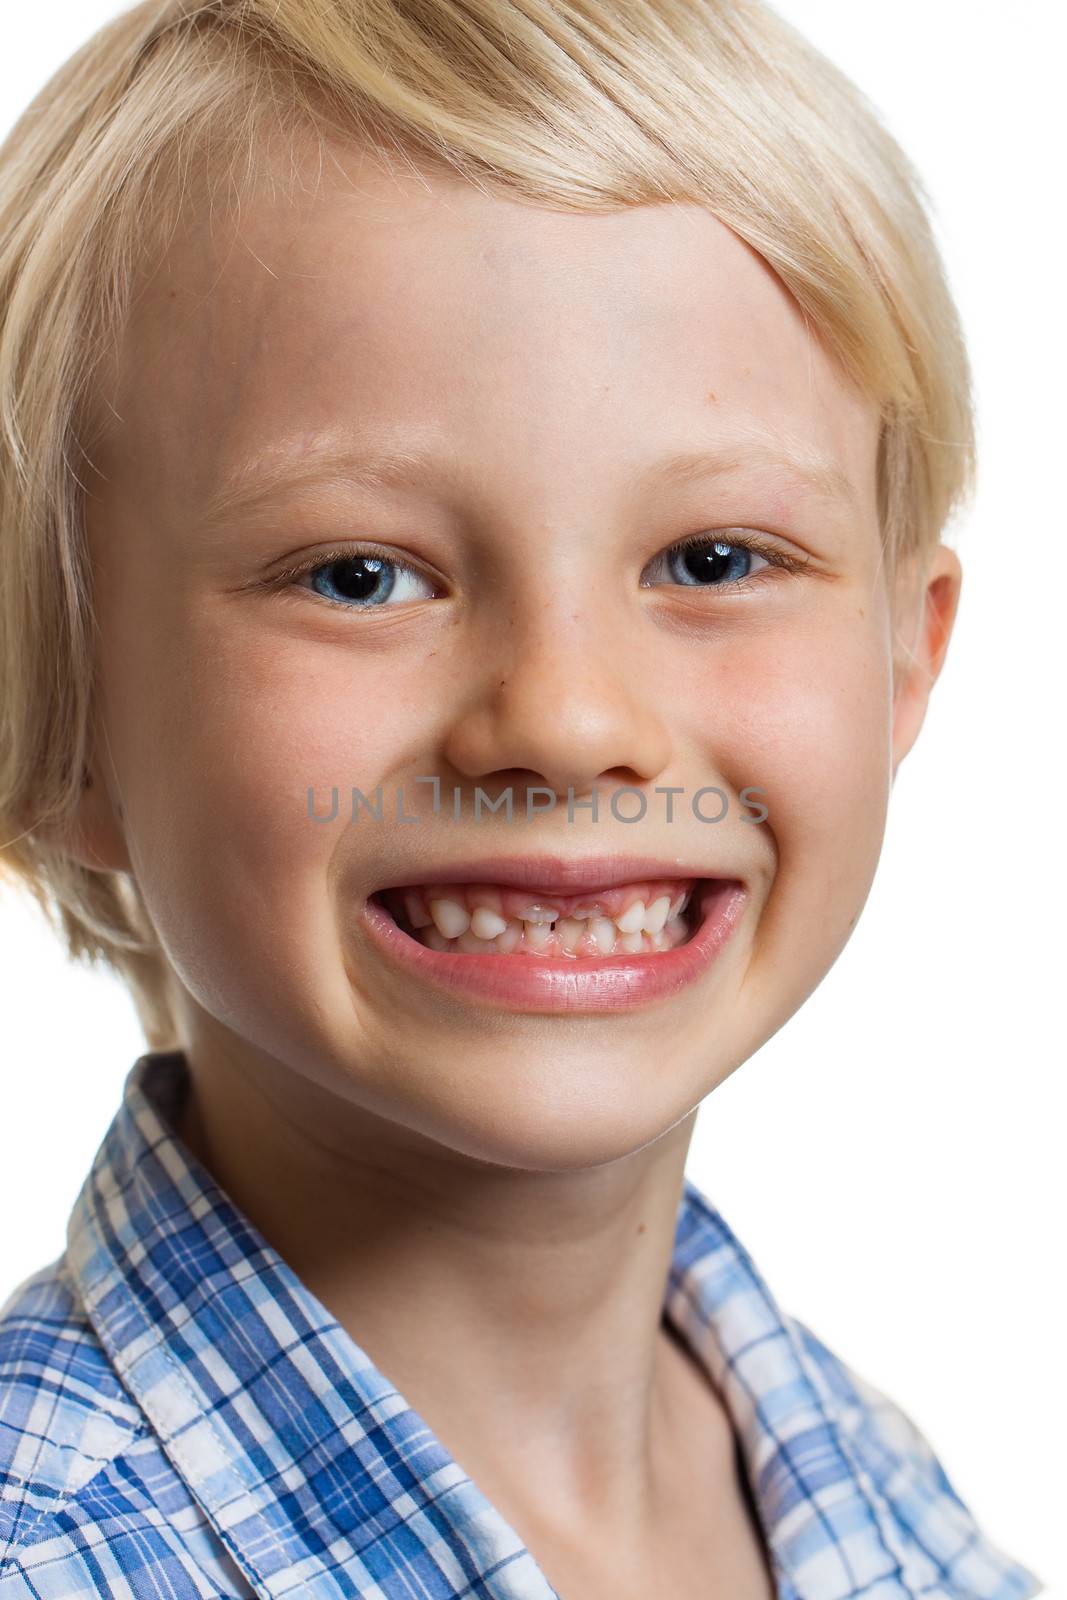 Close-up portrait of a happy cute boy with two missing front teeth. Isolated on white.